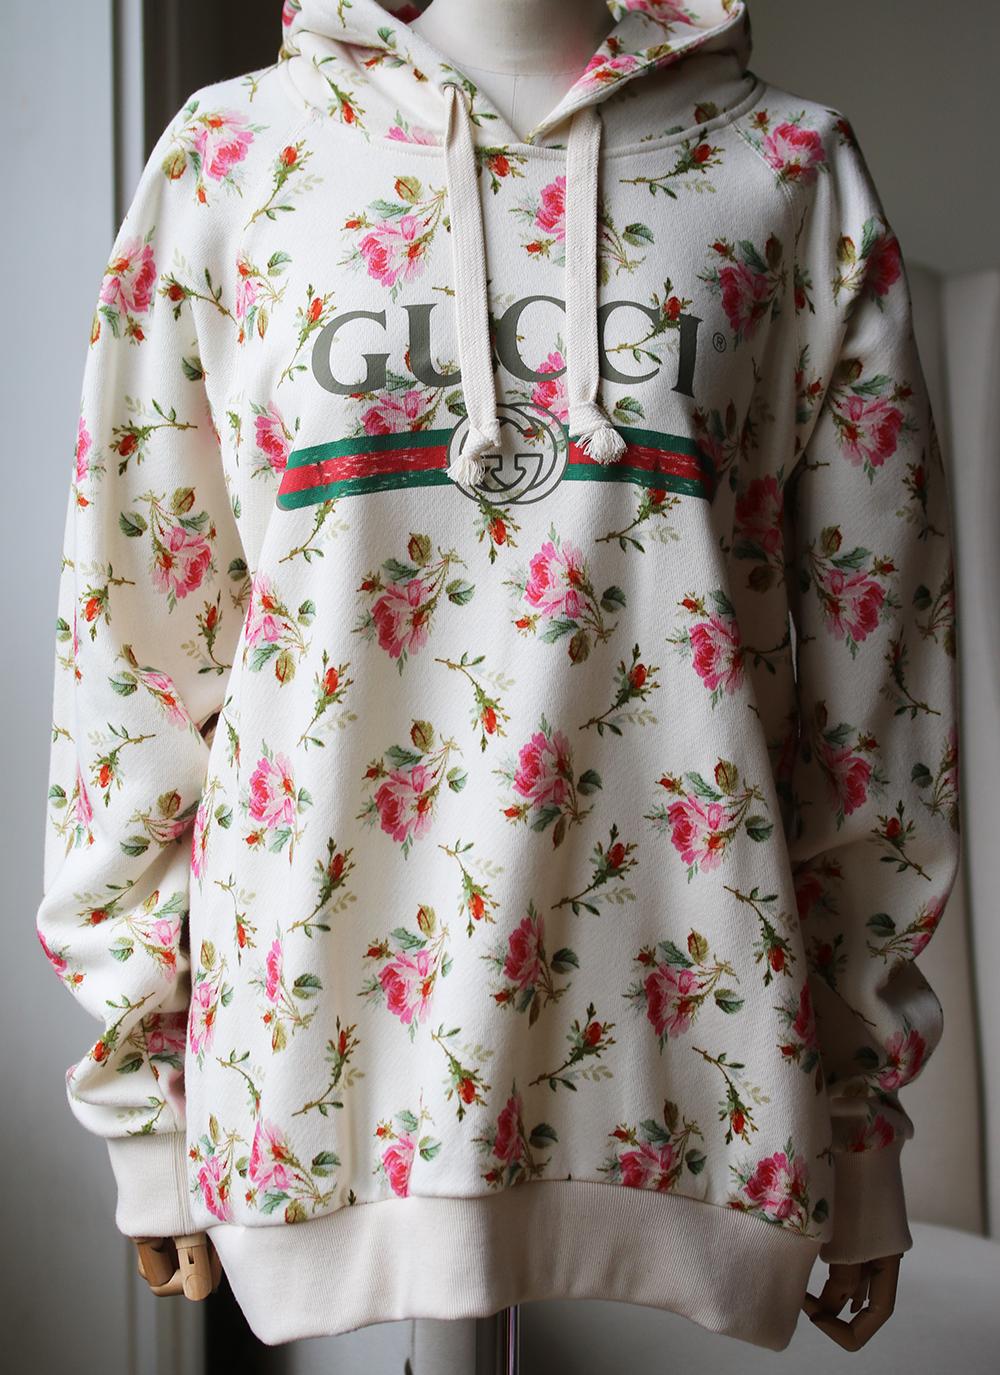 The delicate Rose print is shown on an oversize hooded sweatshirt with the Gucci vintage logo. The logo was inspired by prints from the '80s and speaks to the athletic feel of the most recent collections. Rose print cotton jersey with Gucci vintage